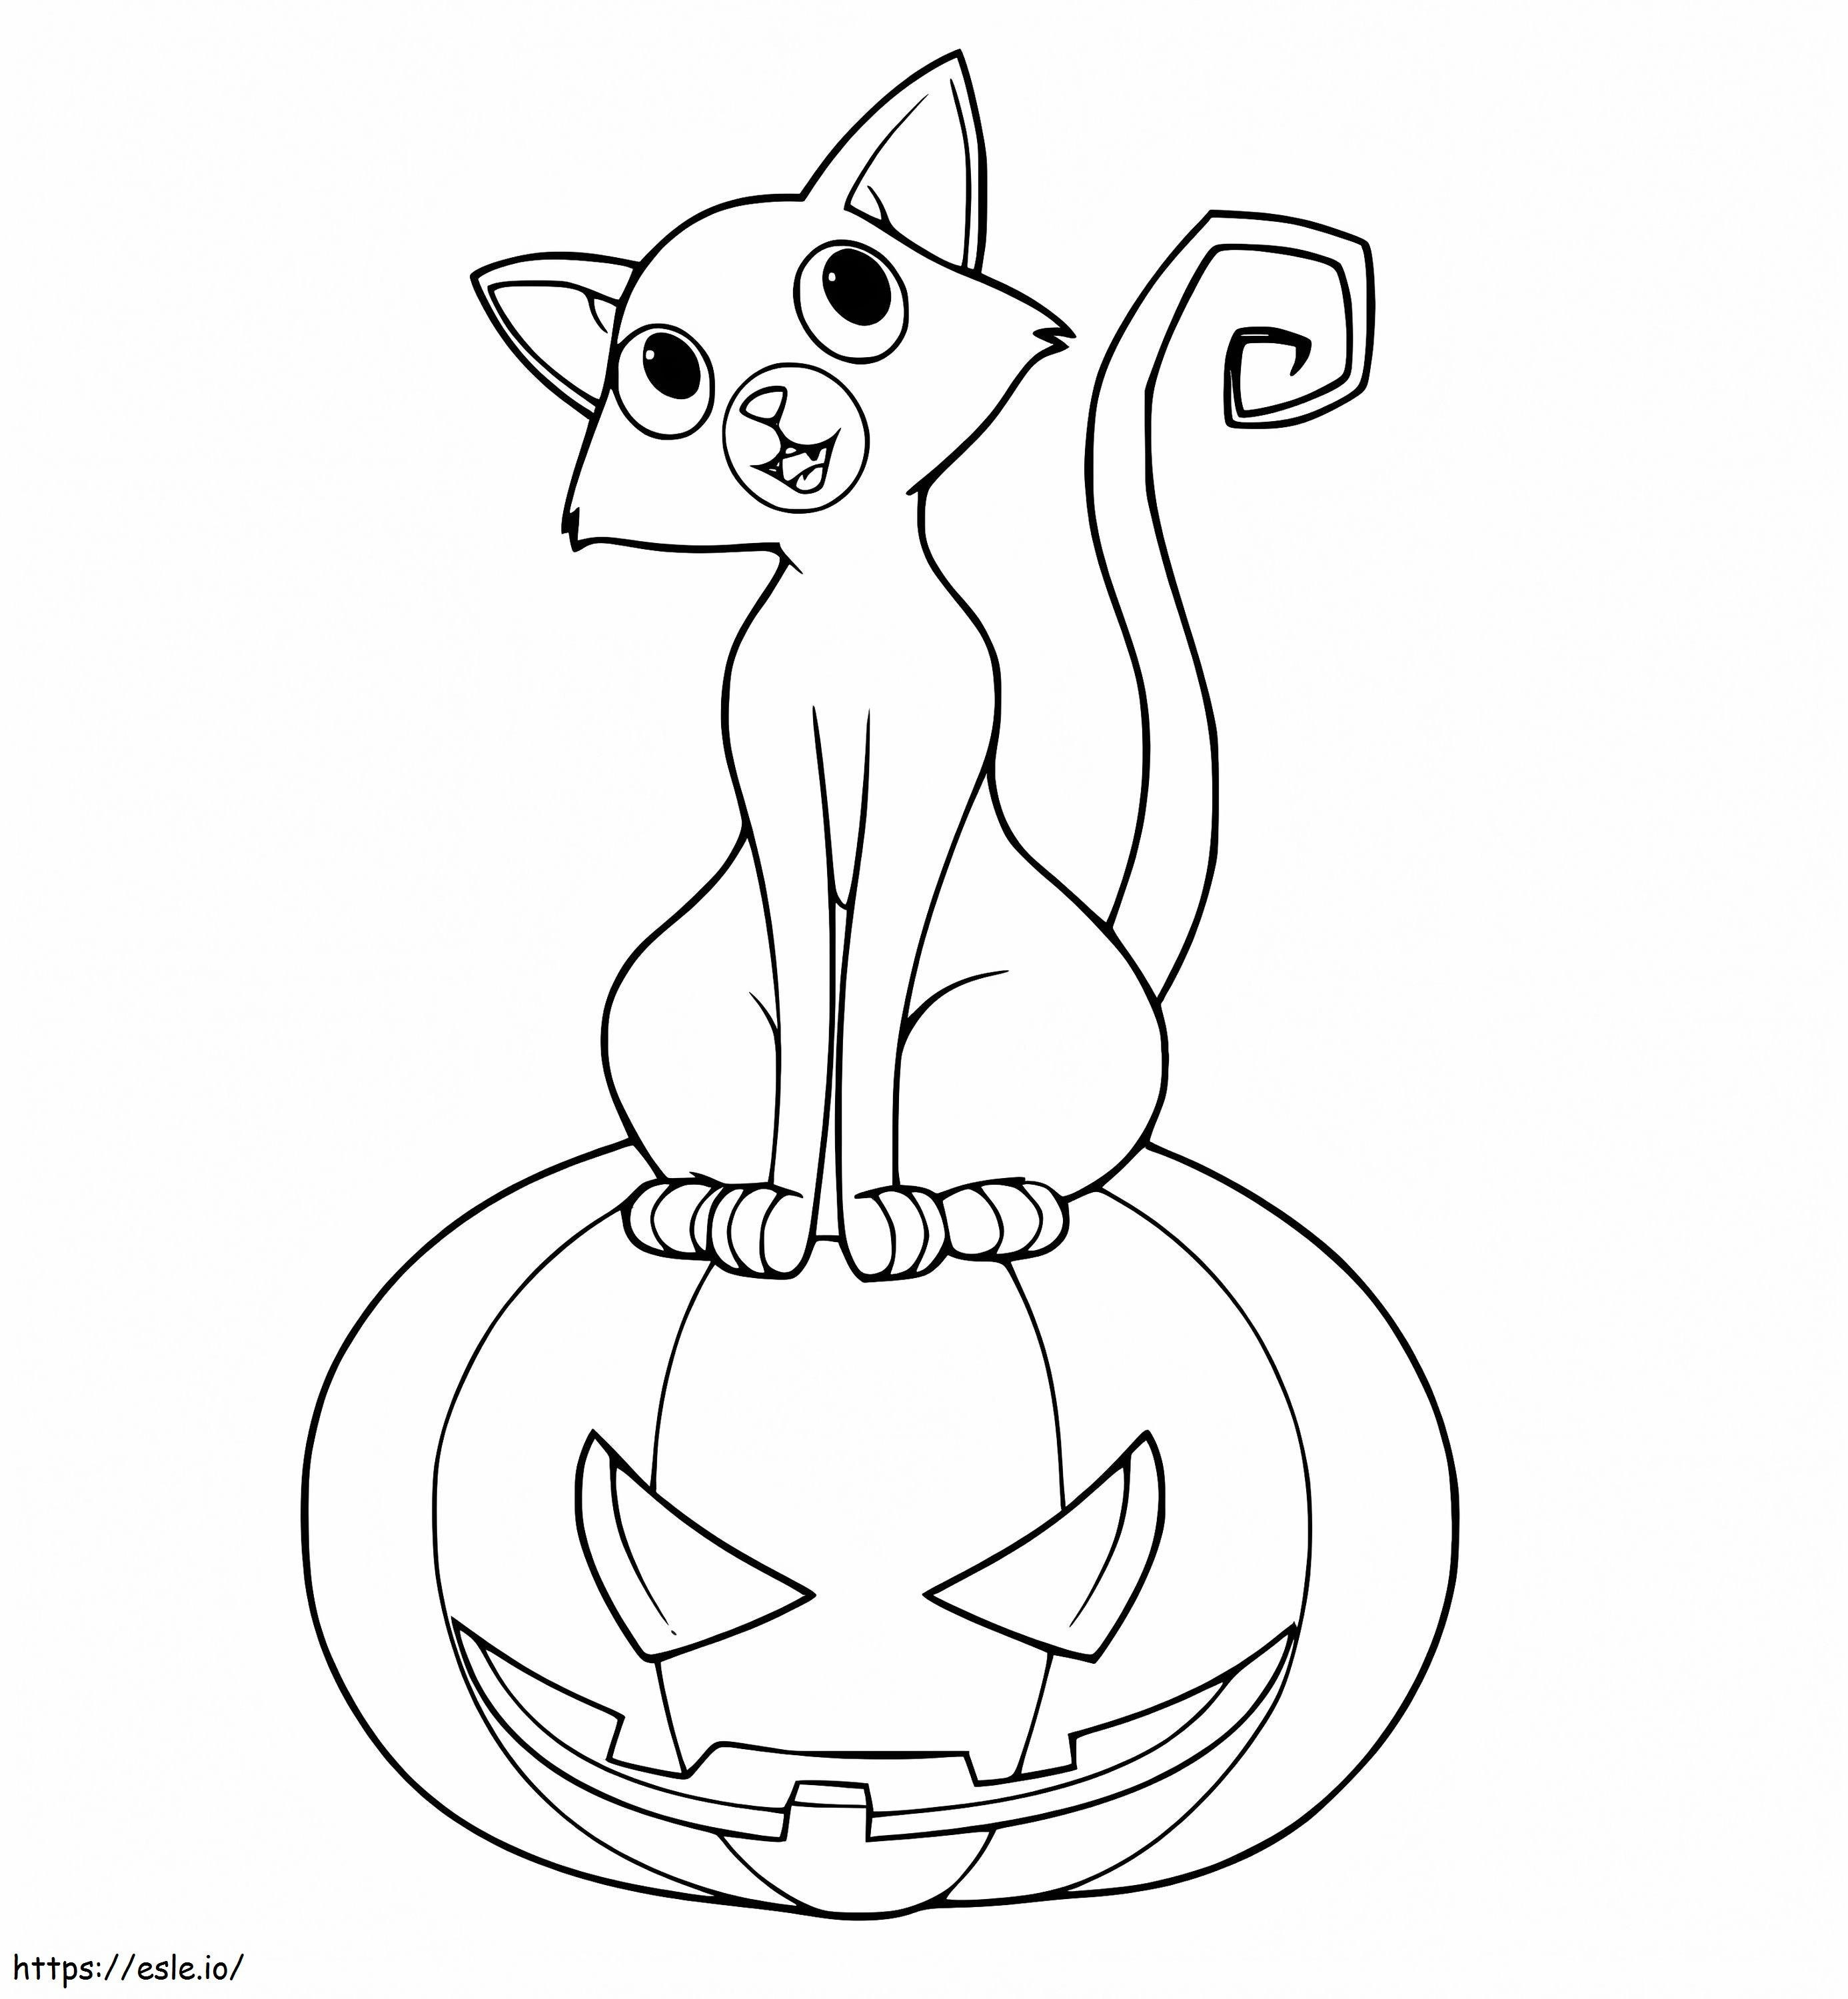 Cute Cat On Jack O Lantern coloring page